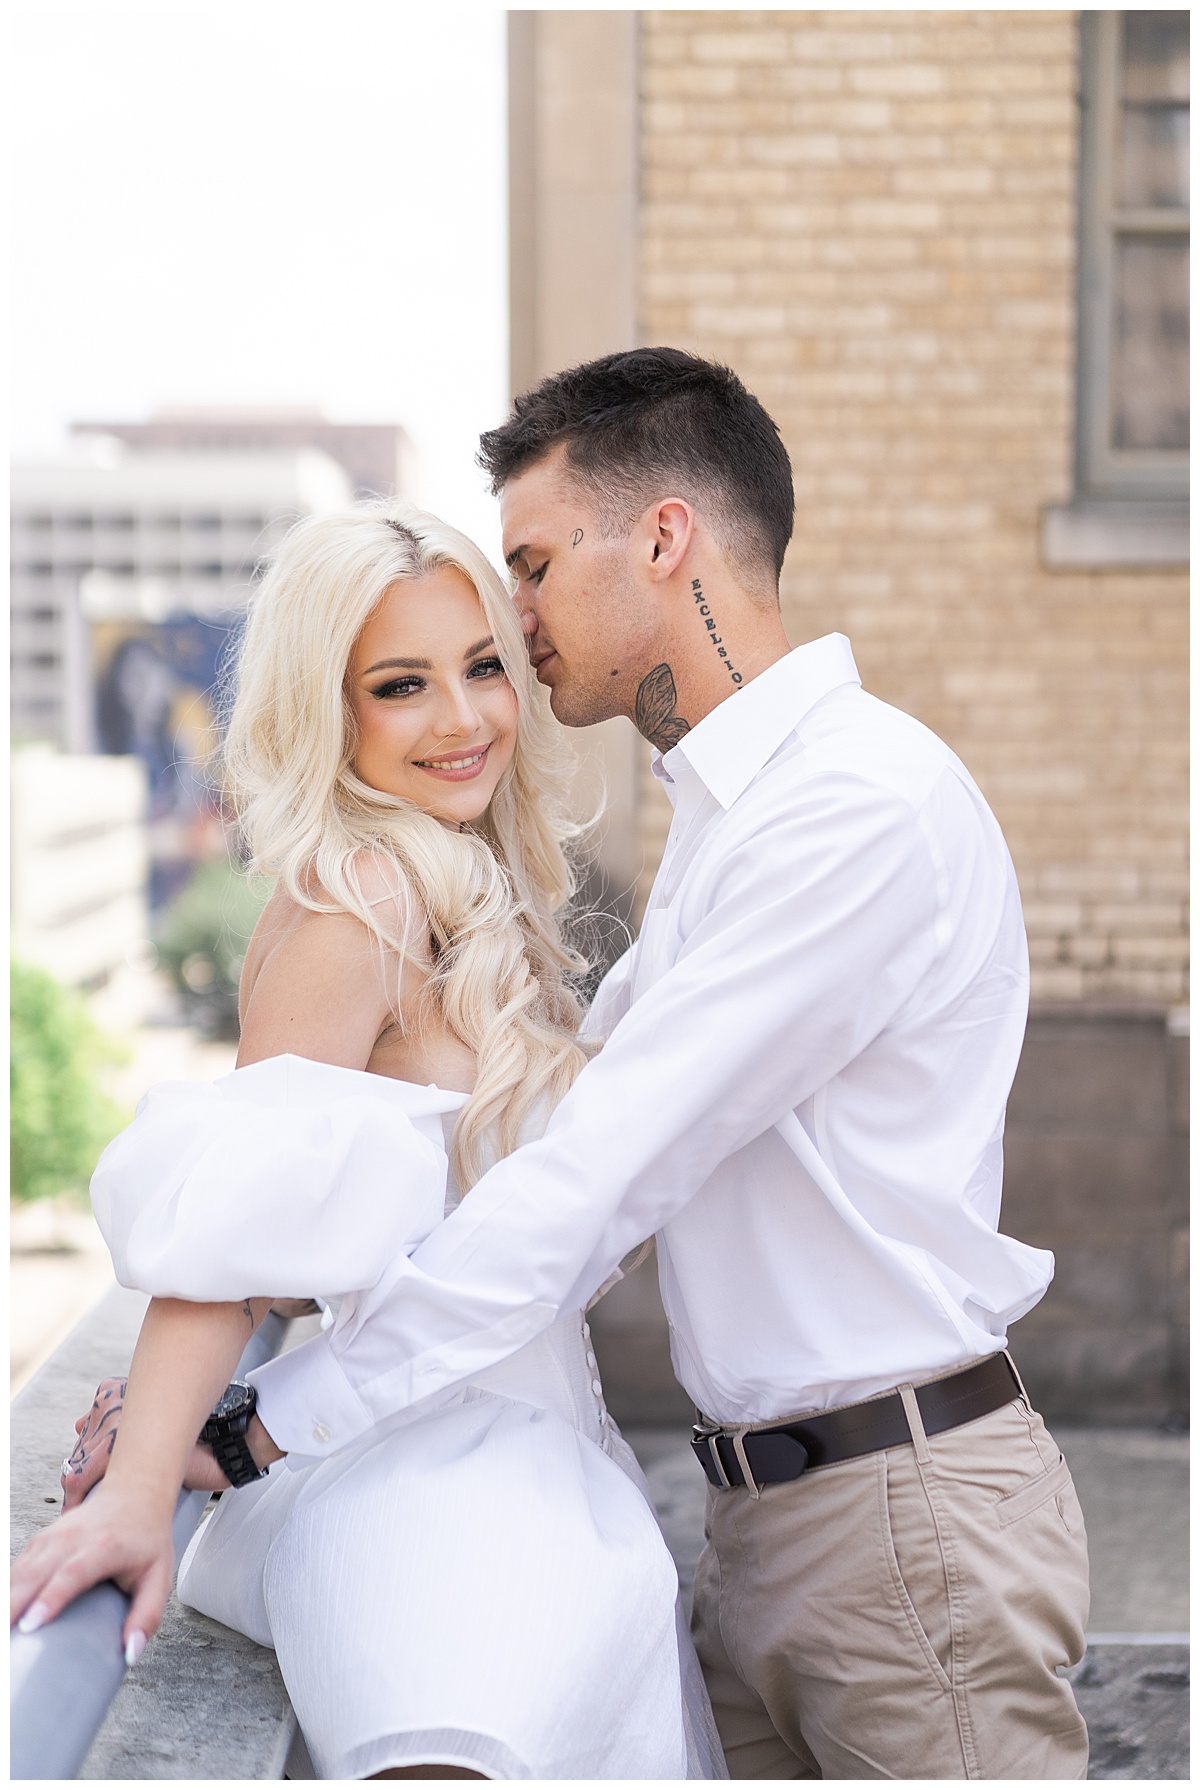 Man kisses woman for Downtown Houston Rooftop Engagement Session